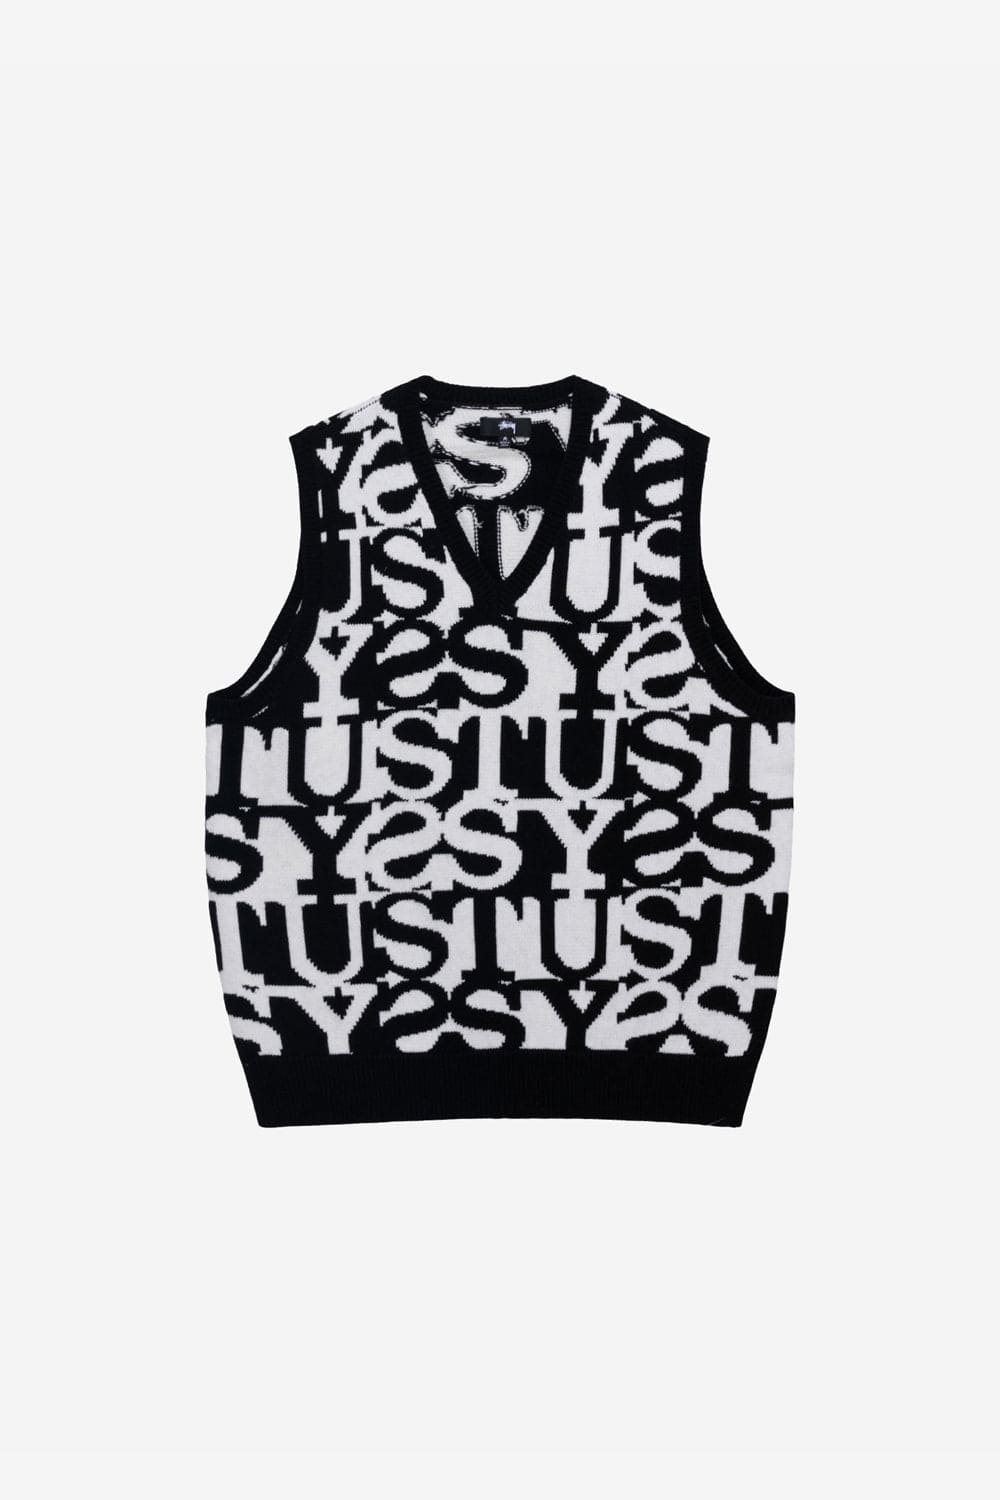 Stussy - Stacked Sweater Vest